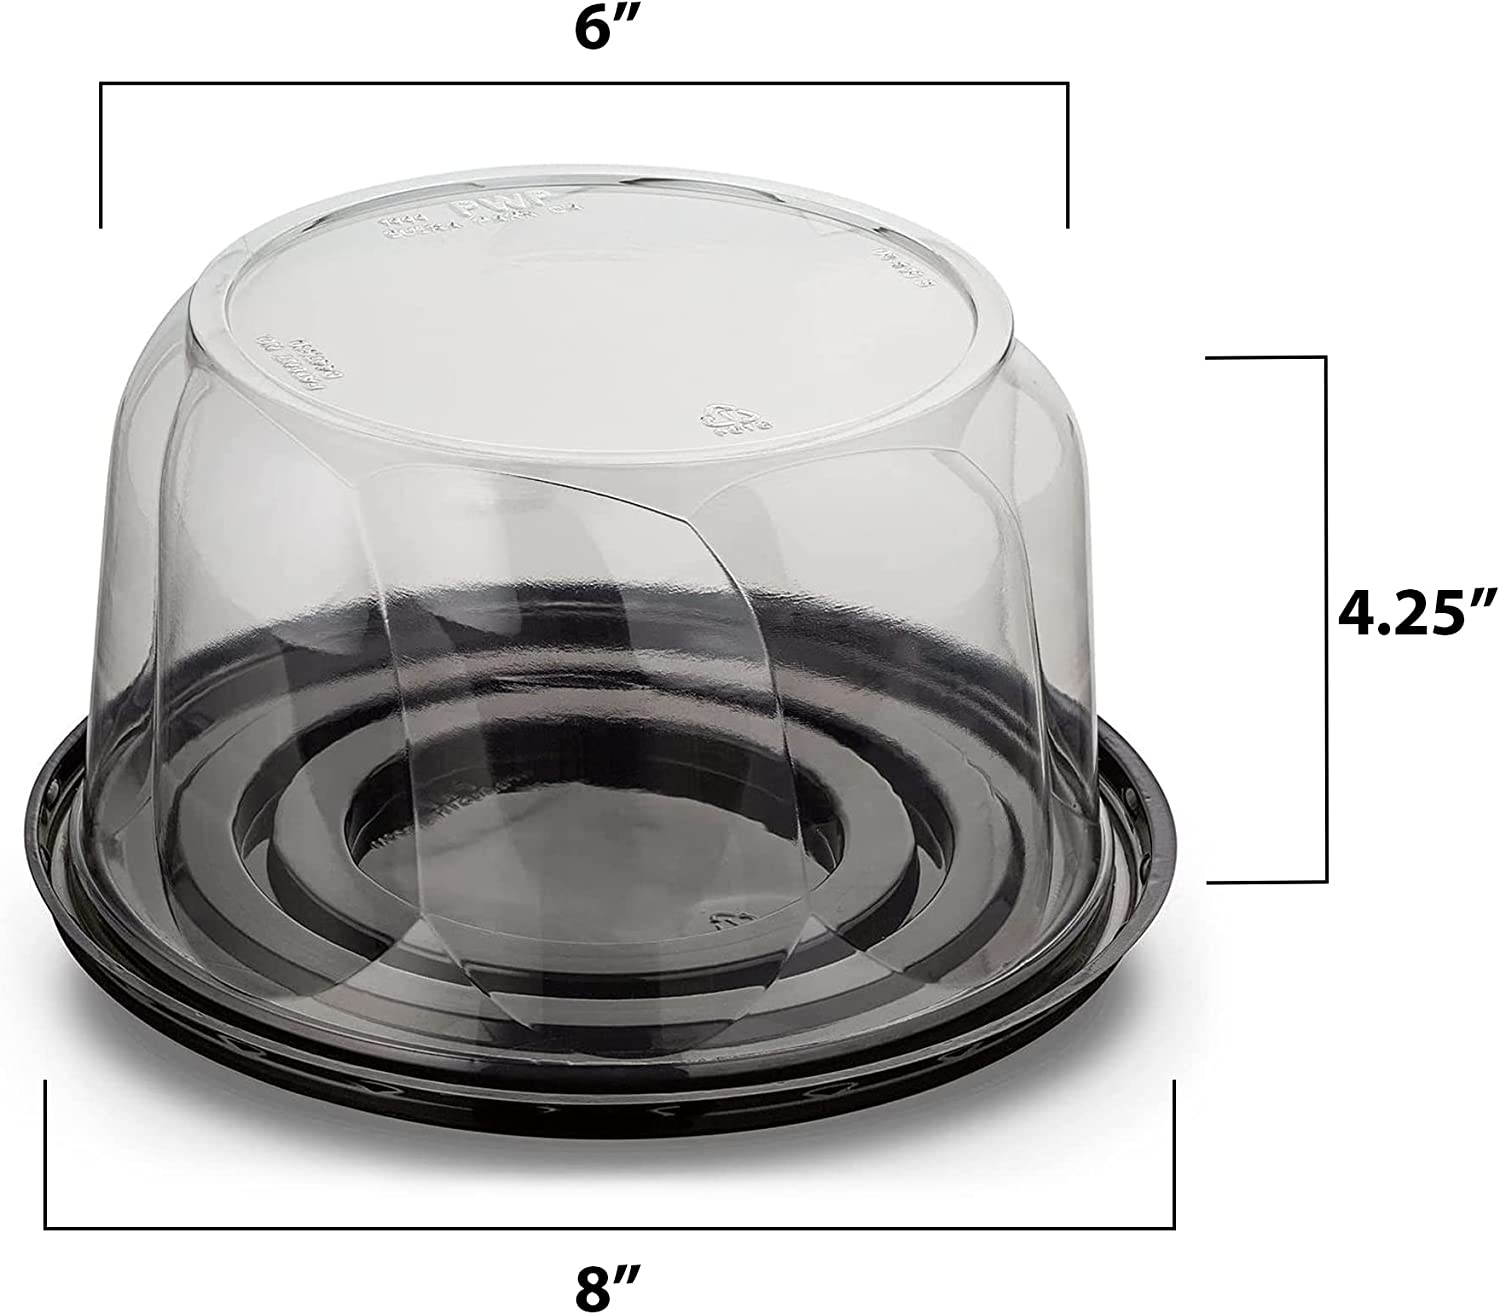 MT Products PET Plastic Cake Container with Clear Dome Lid for Optimal  Product Visibility (Pack of 5) - Made in the USA - MT Products